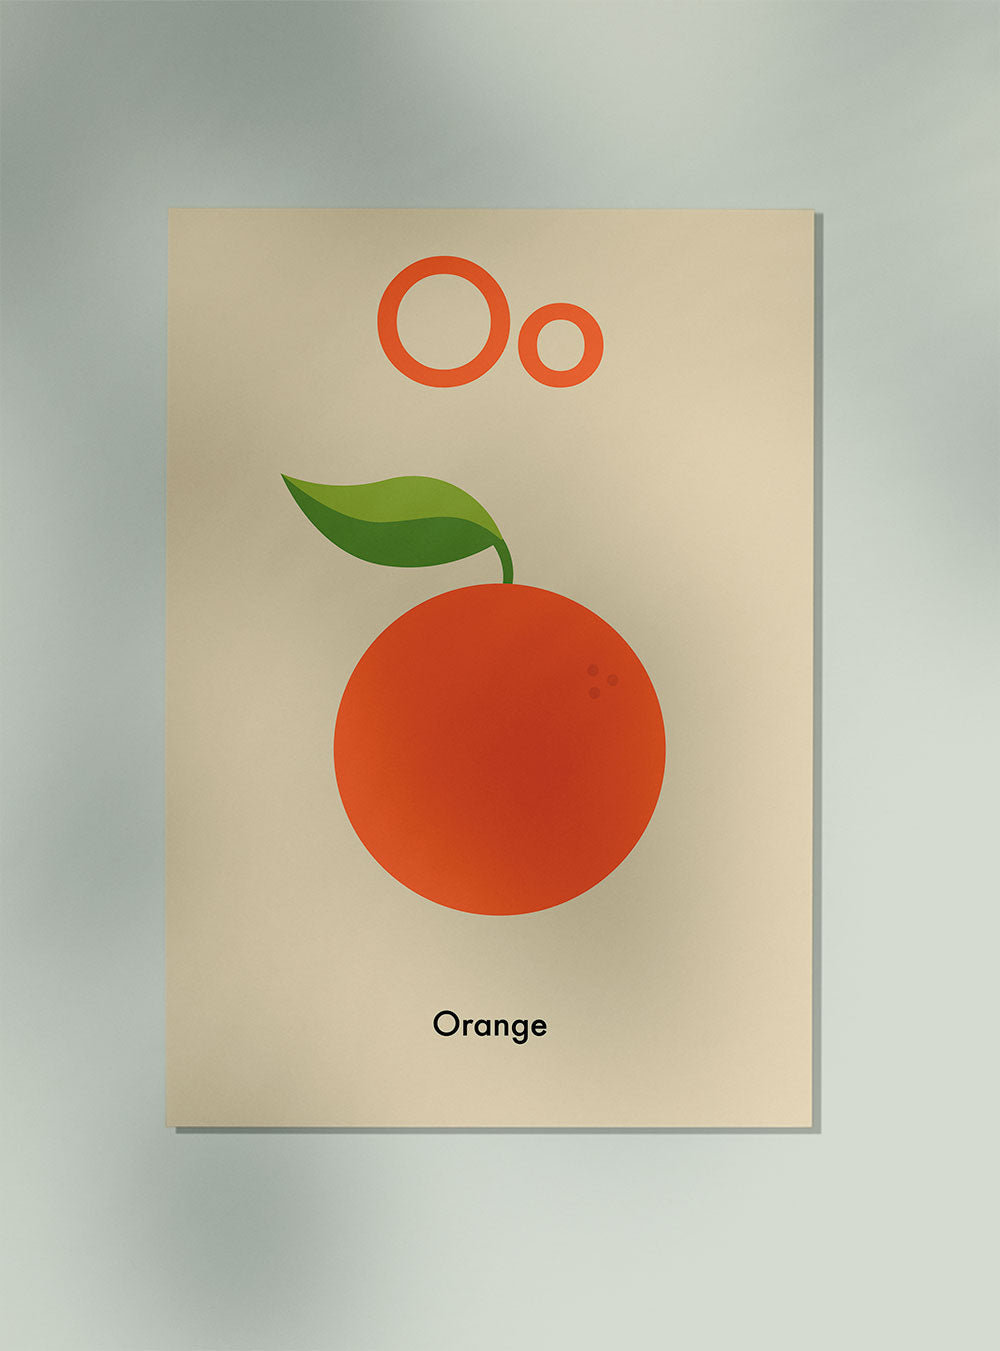 O for Orange - Children's Alphabet Poster in German and English